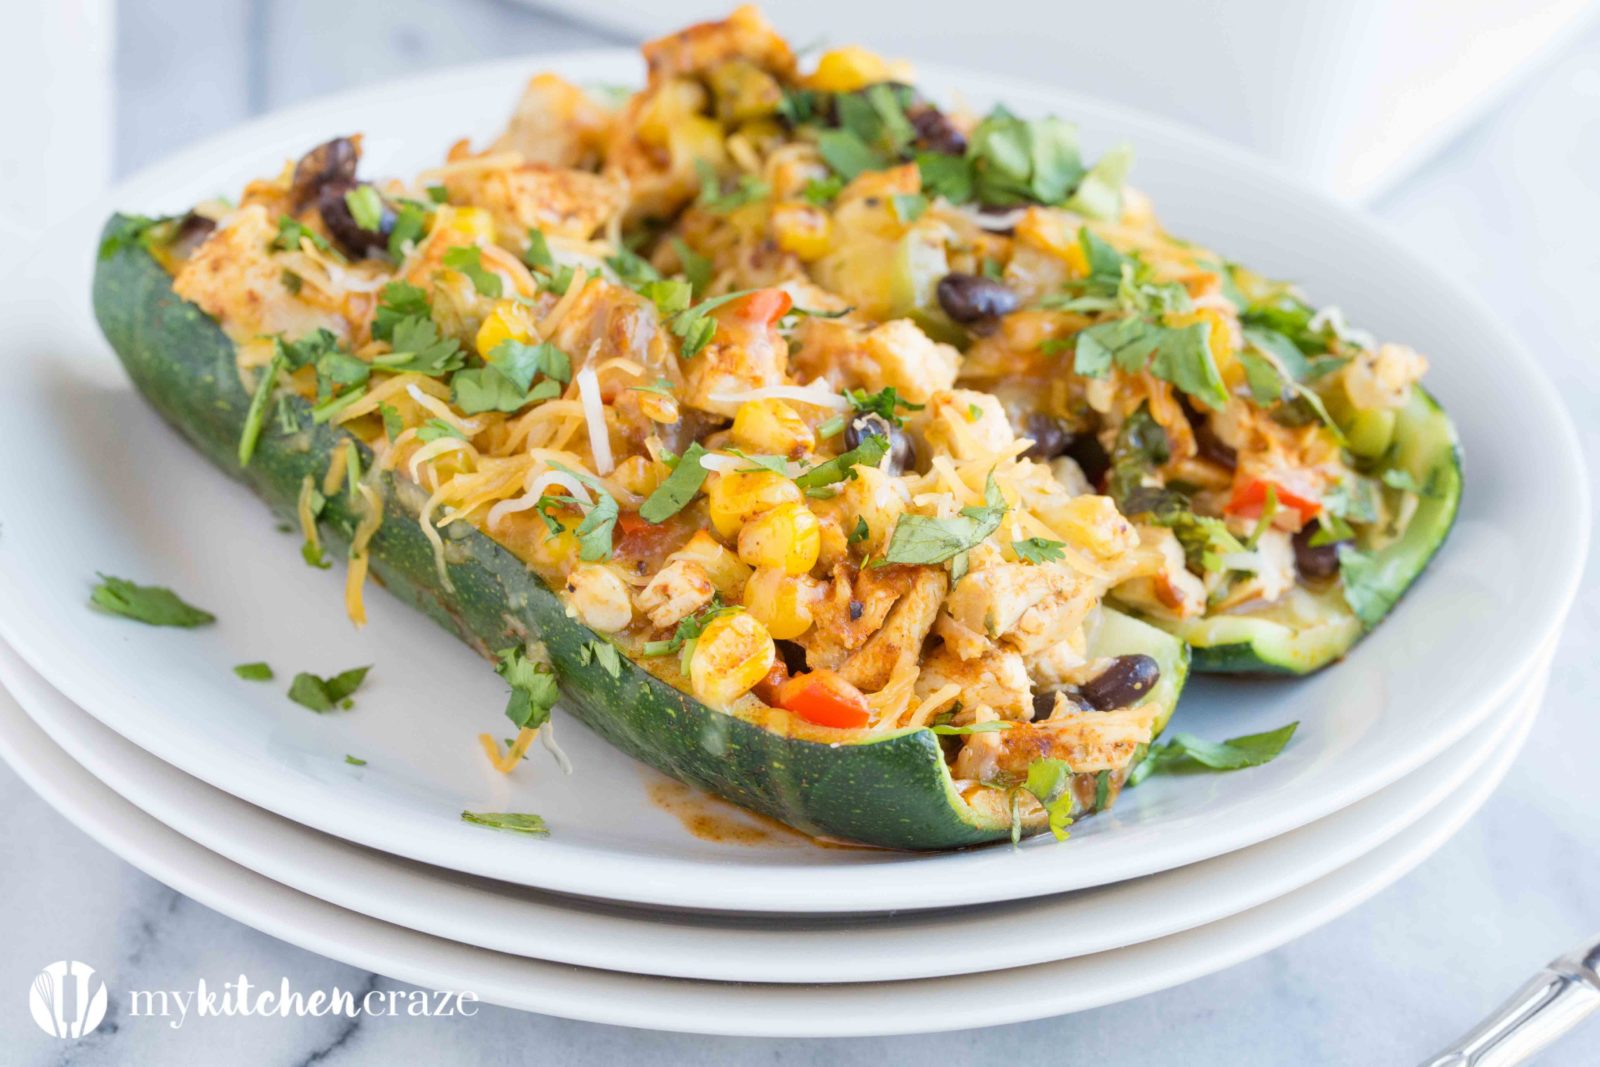 Chicken Enchilada Zucchini Boats are filled with all the same delicious flavors as regular enchiladas, but are healthier! Loaded with tons of veggies and yummy flavors, these enchiladas are great for dinner!